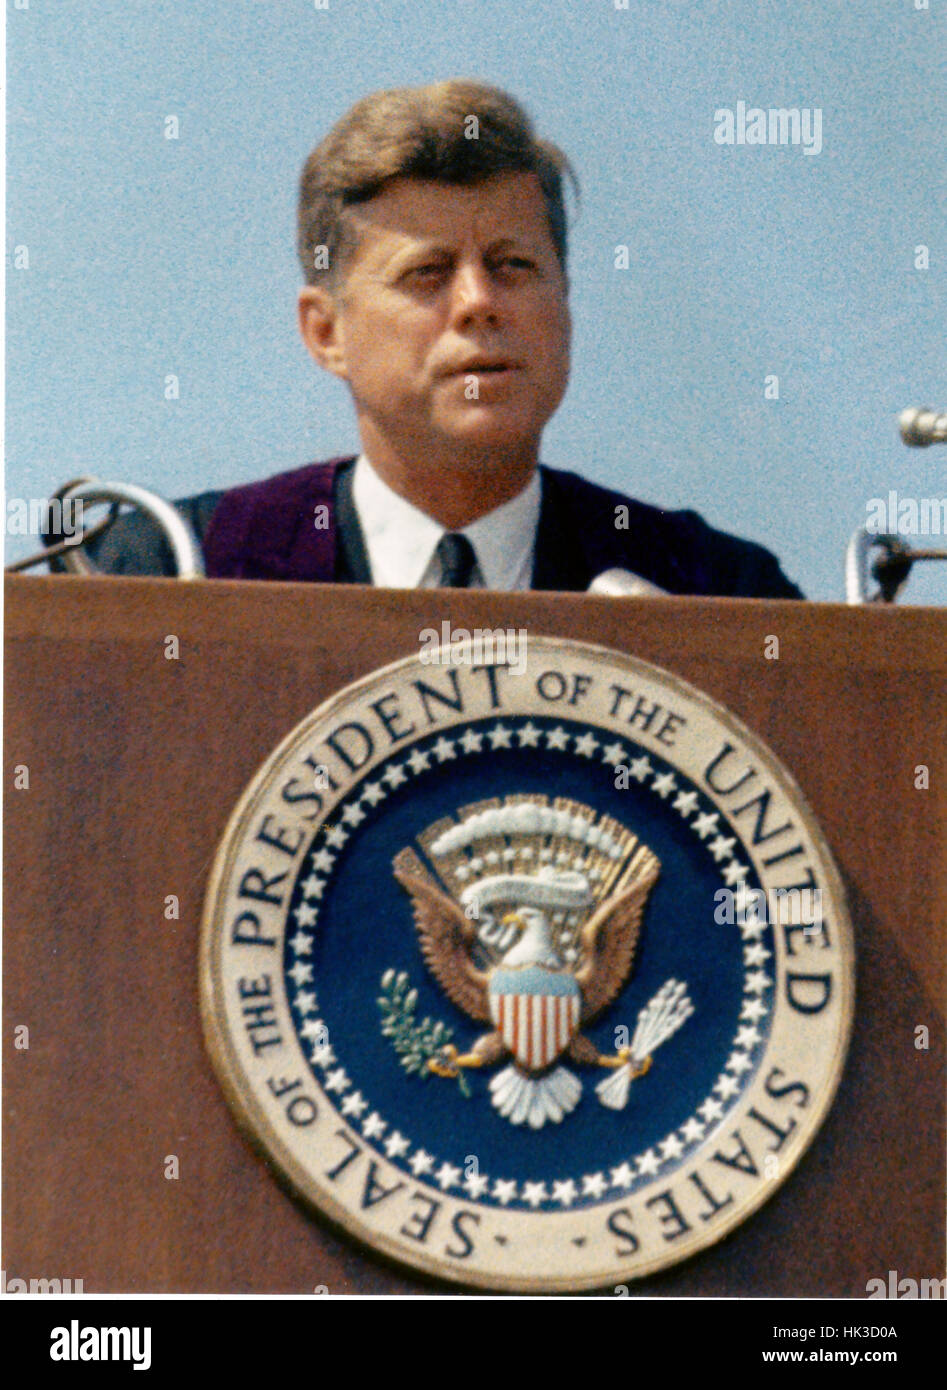 United States President John F. Kennedy speaks at the American University commencement in Washington, D.C. on June 10, 1963. This speech is known as Kennedy's 'Pax Americana' speech, where he outlined his vision for world peace..Credit: Arnie Sachs / CNP Stock Photo